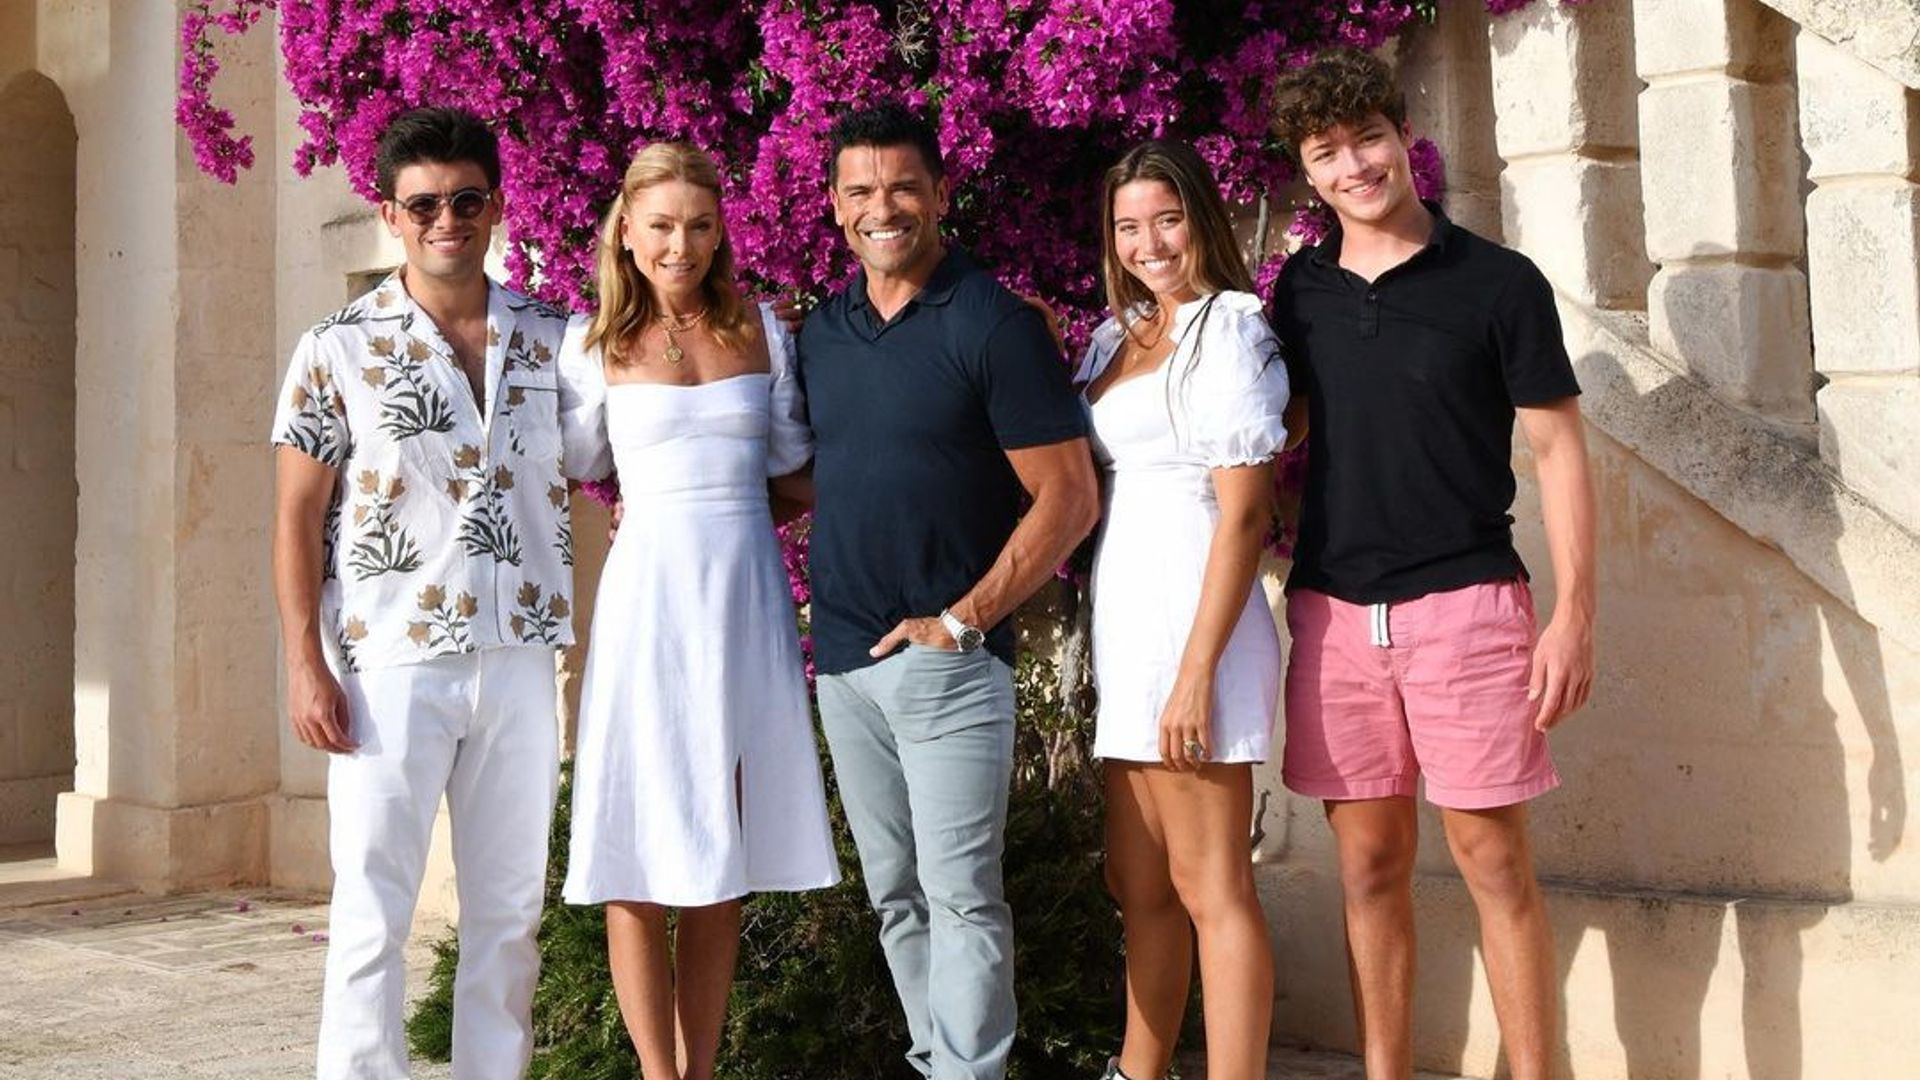 Kelly Ripa and Mark Consuelos on family vacation with their three children